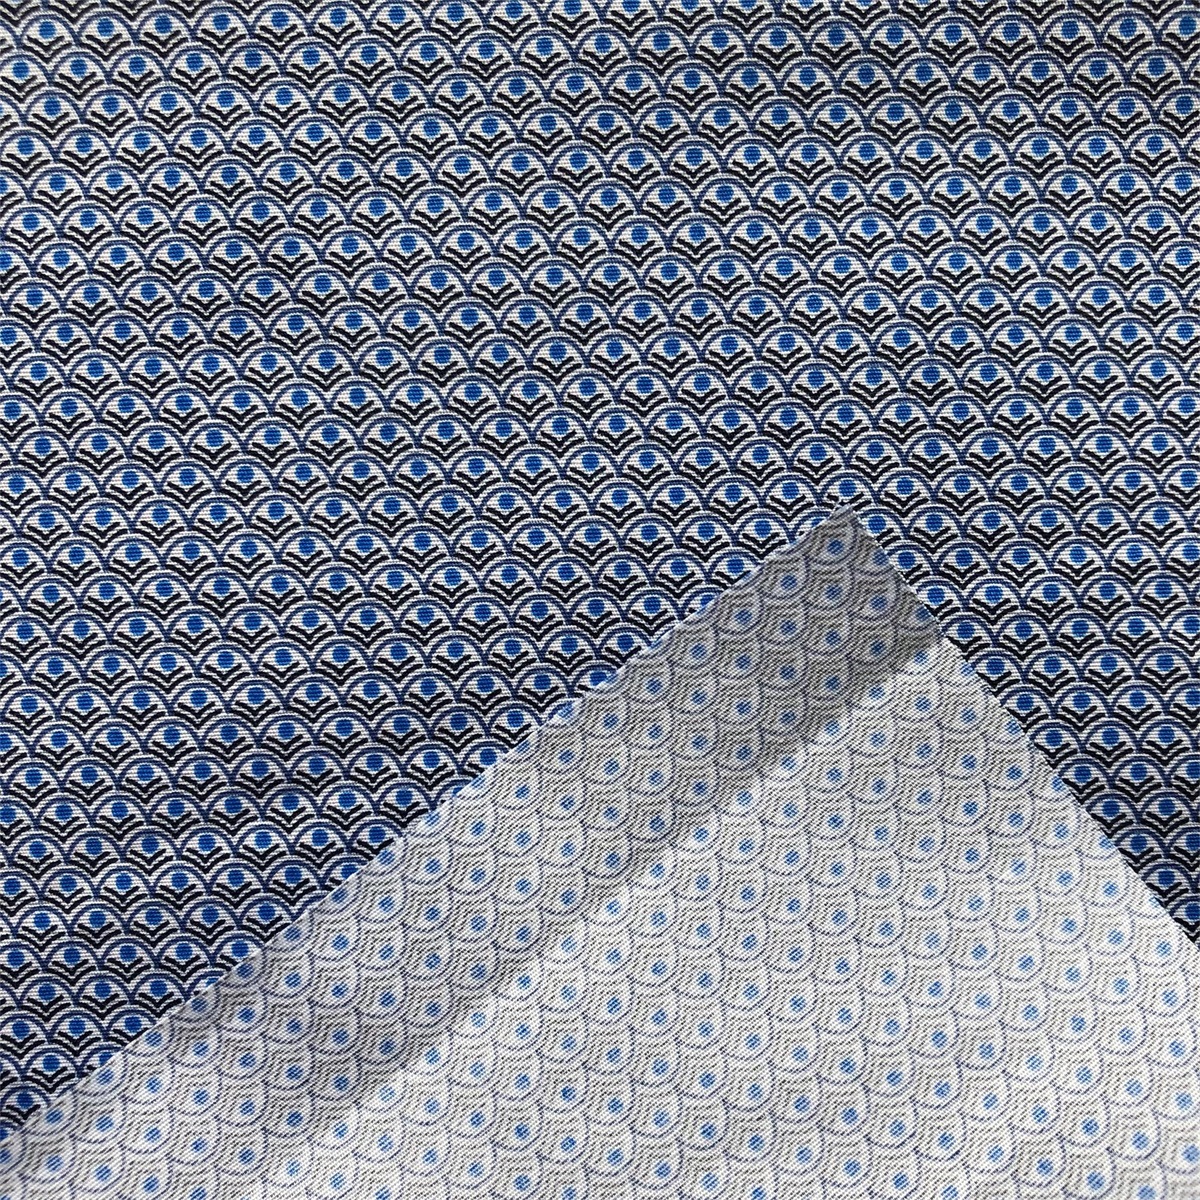 Soft breathable Spandex Fabric by compact yarn 98% cotton 2% spandex poplin printed shirts woven stretchy fabric